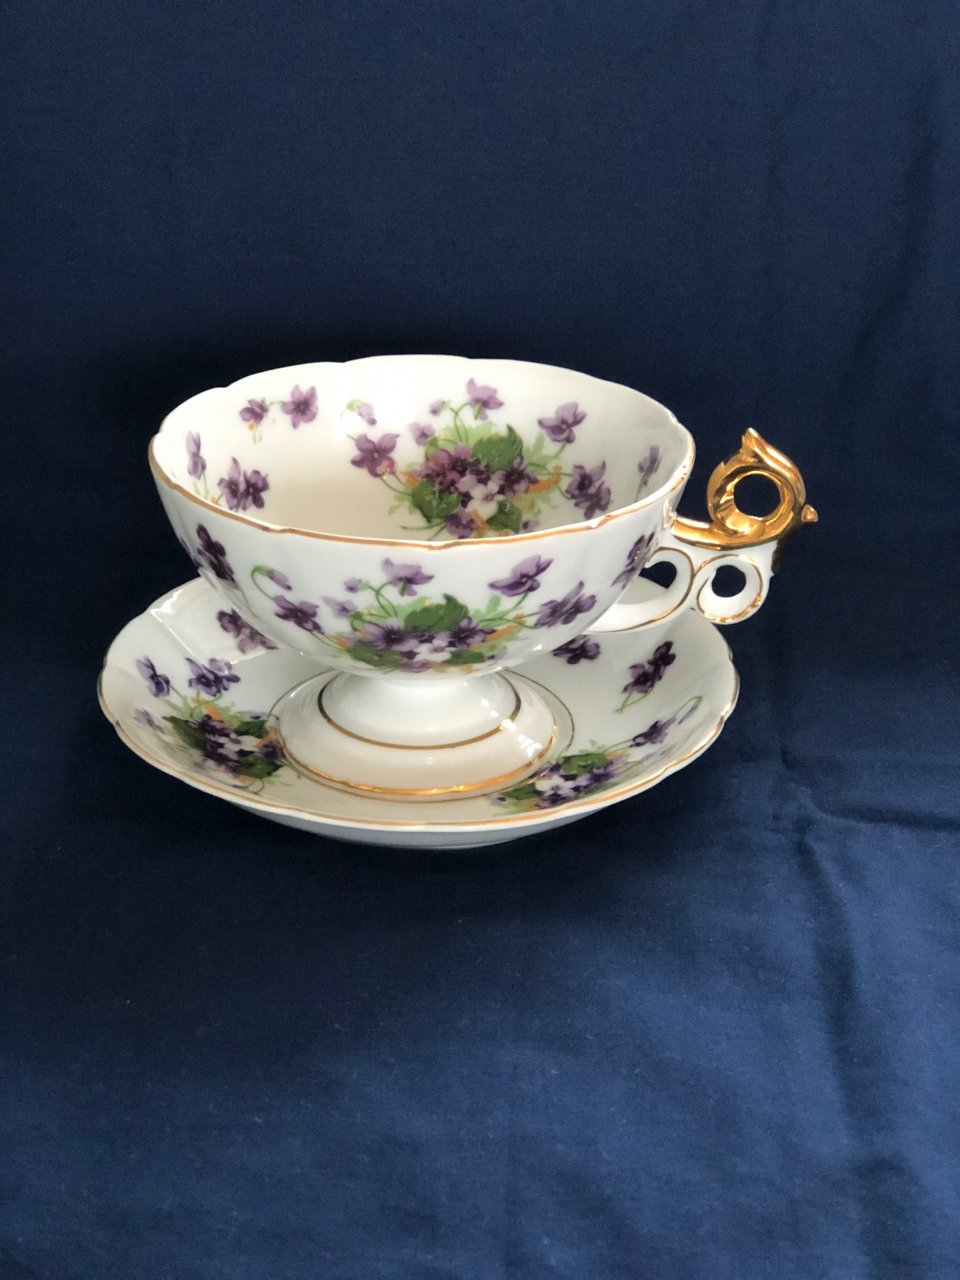 Unsolved Mystery Saji Fancy China Made In Japan Oversized Teacup.